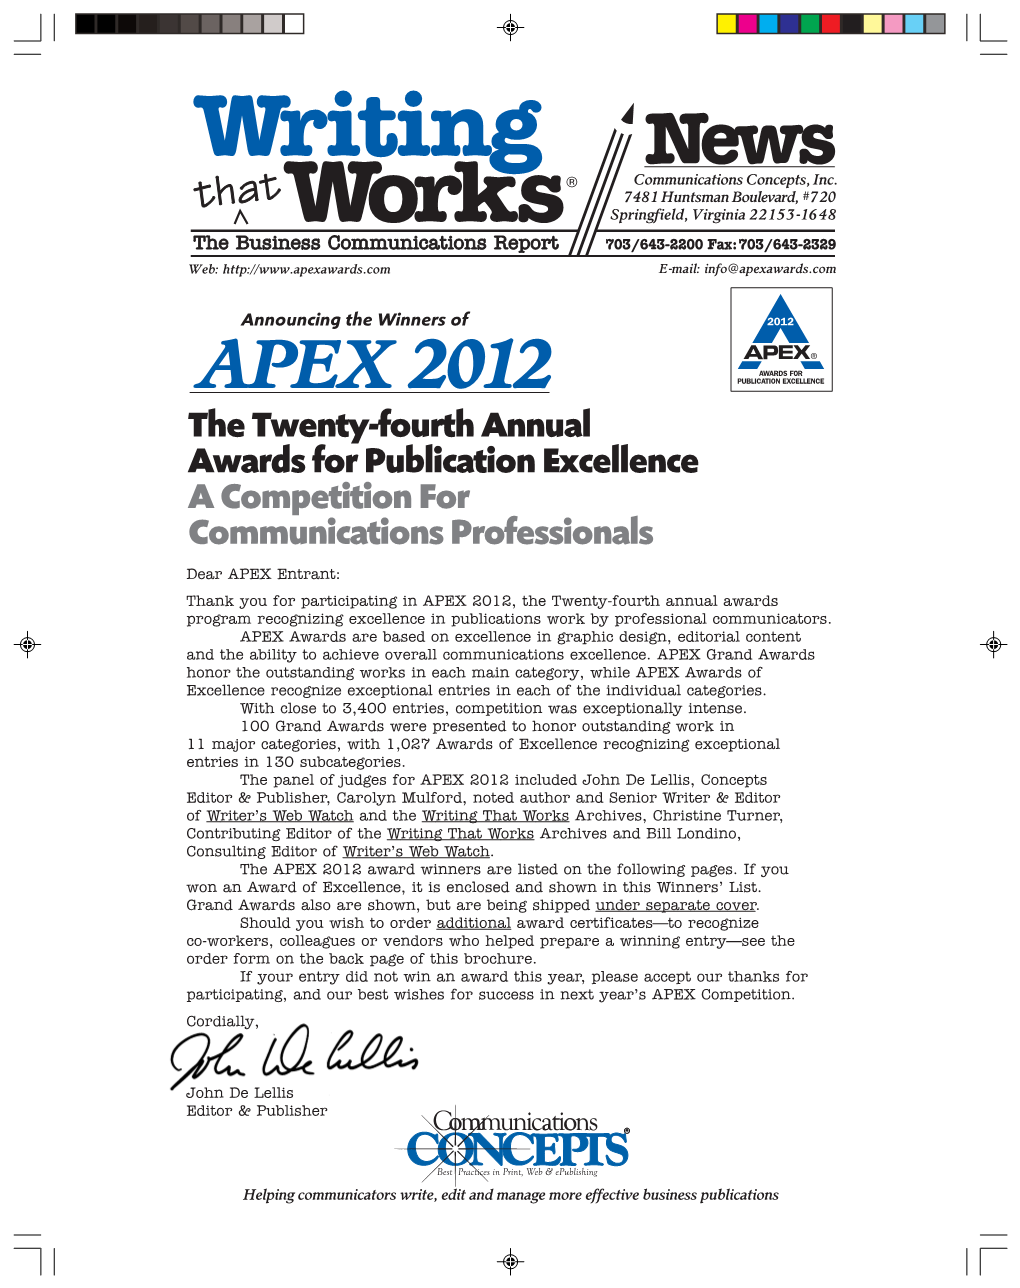 Announcing the Winners of APEX 2012 the Twenty-Fourth Annual Awards for Publication Excellence a Competition for Communications Professionals